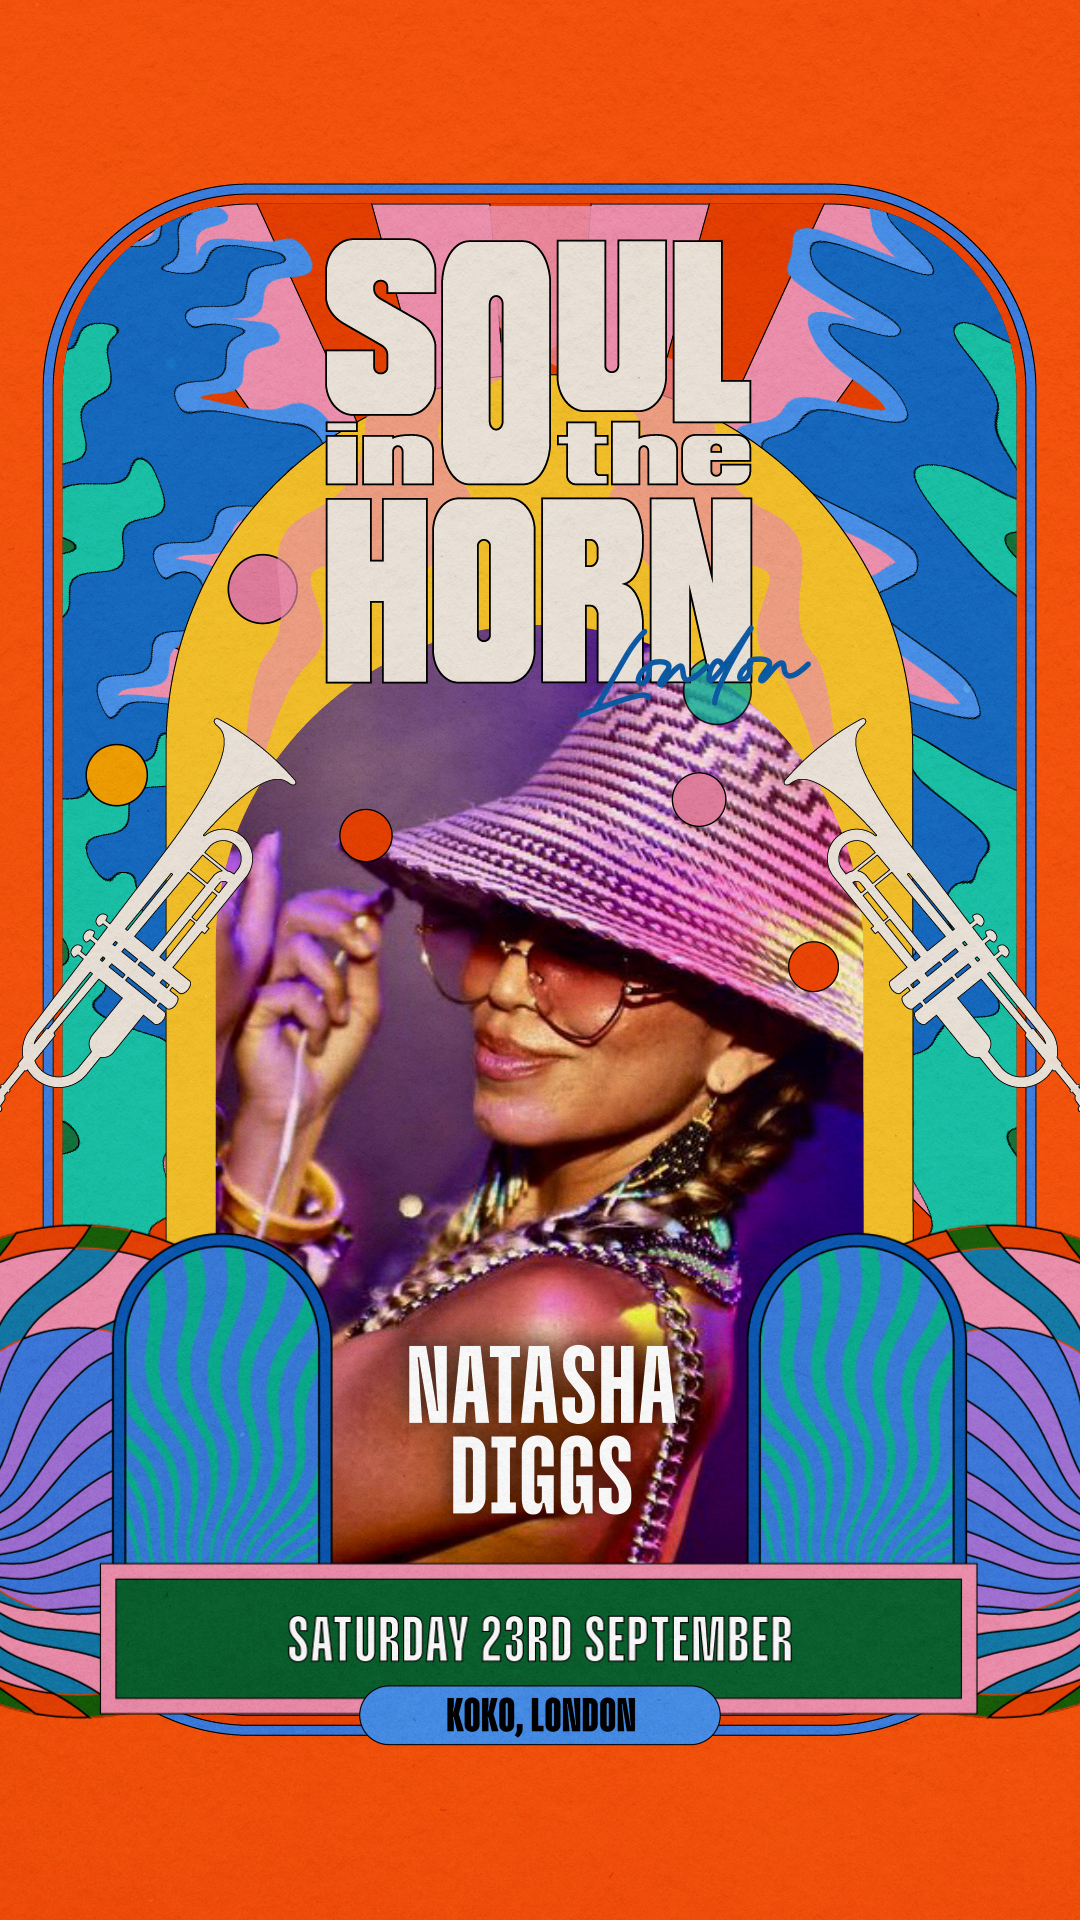 Digital social media ad design and production for legendary New York underground club night Soul In The Horn featuring DJ Natasha Diggs